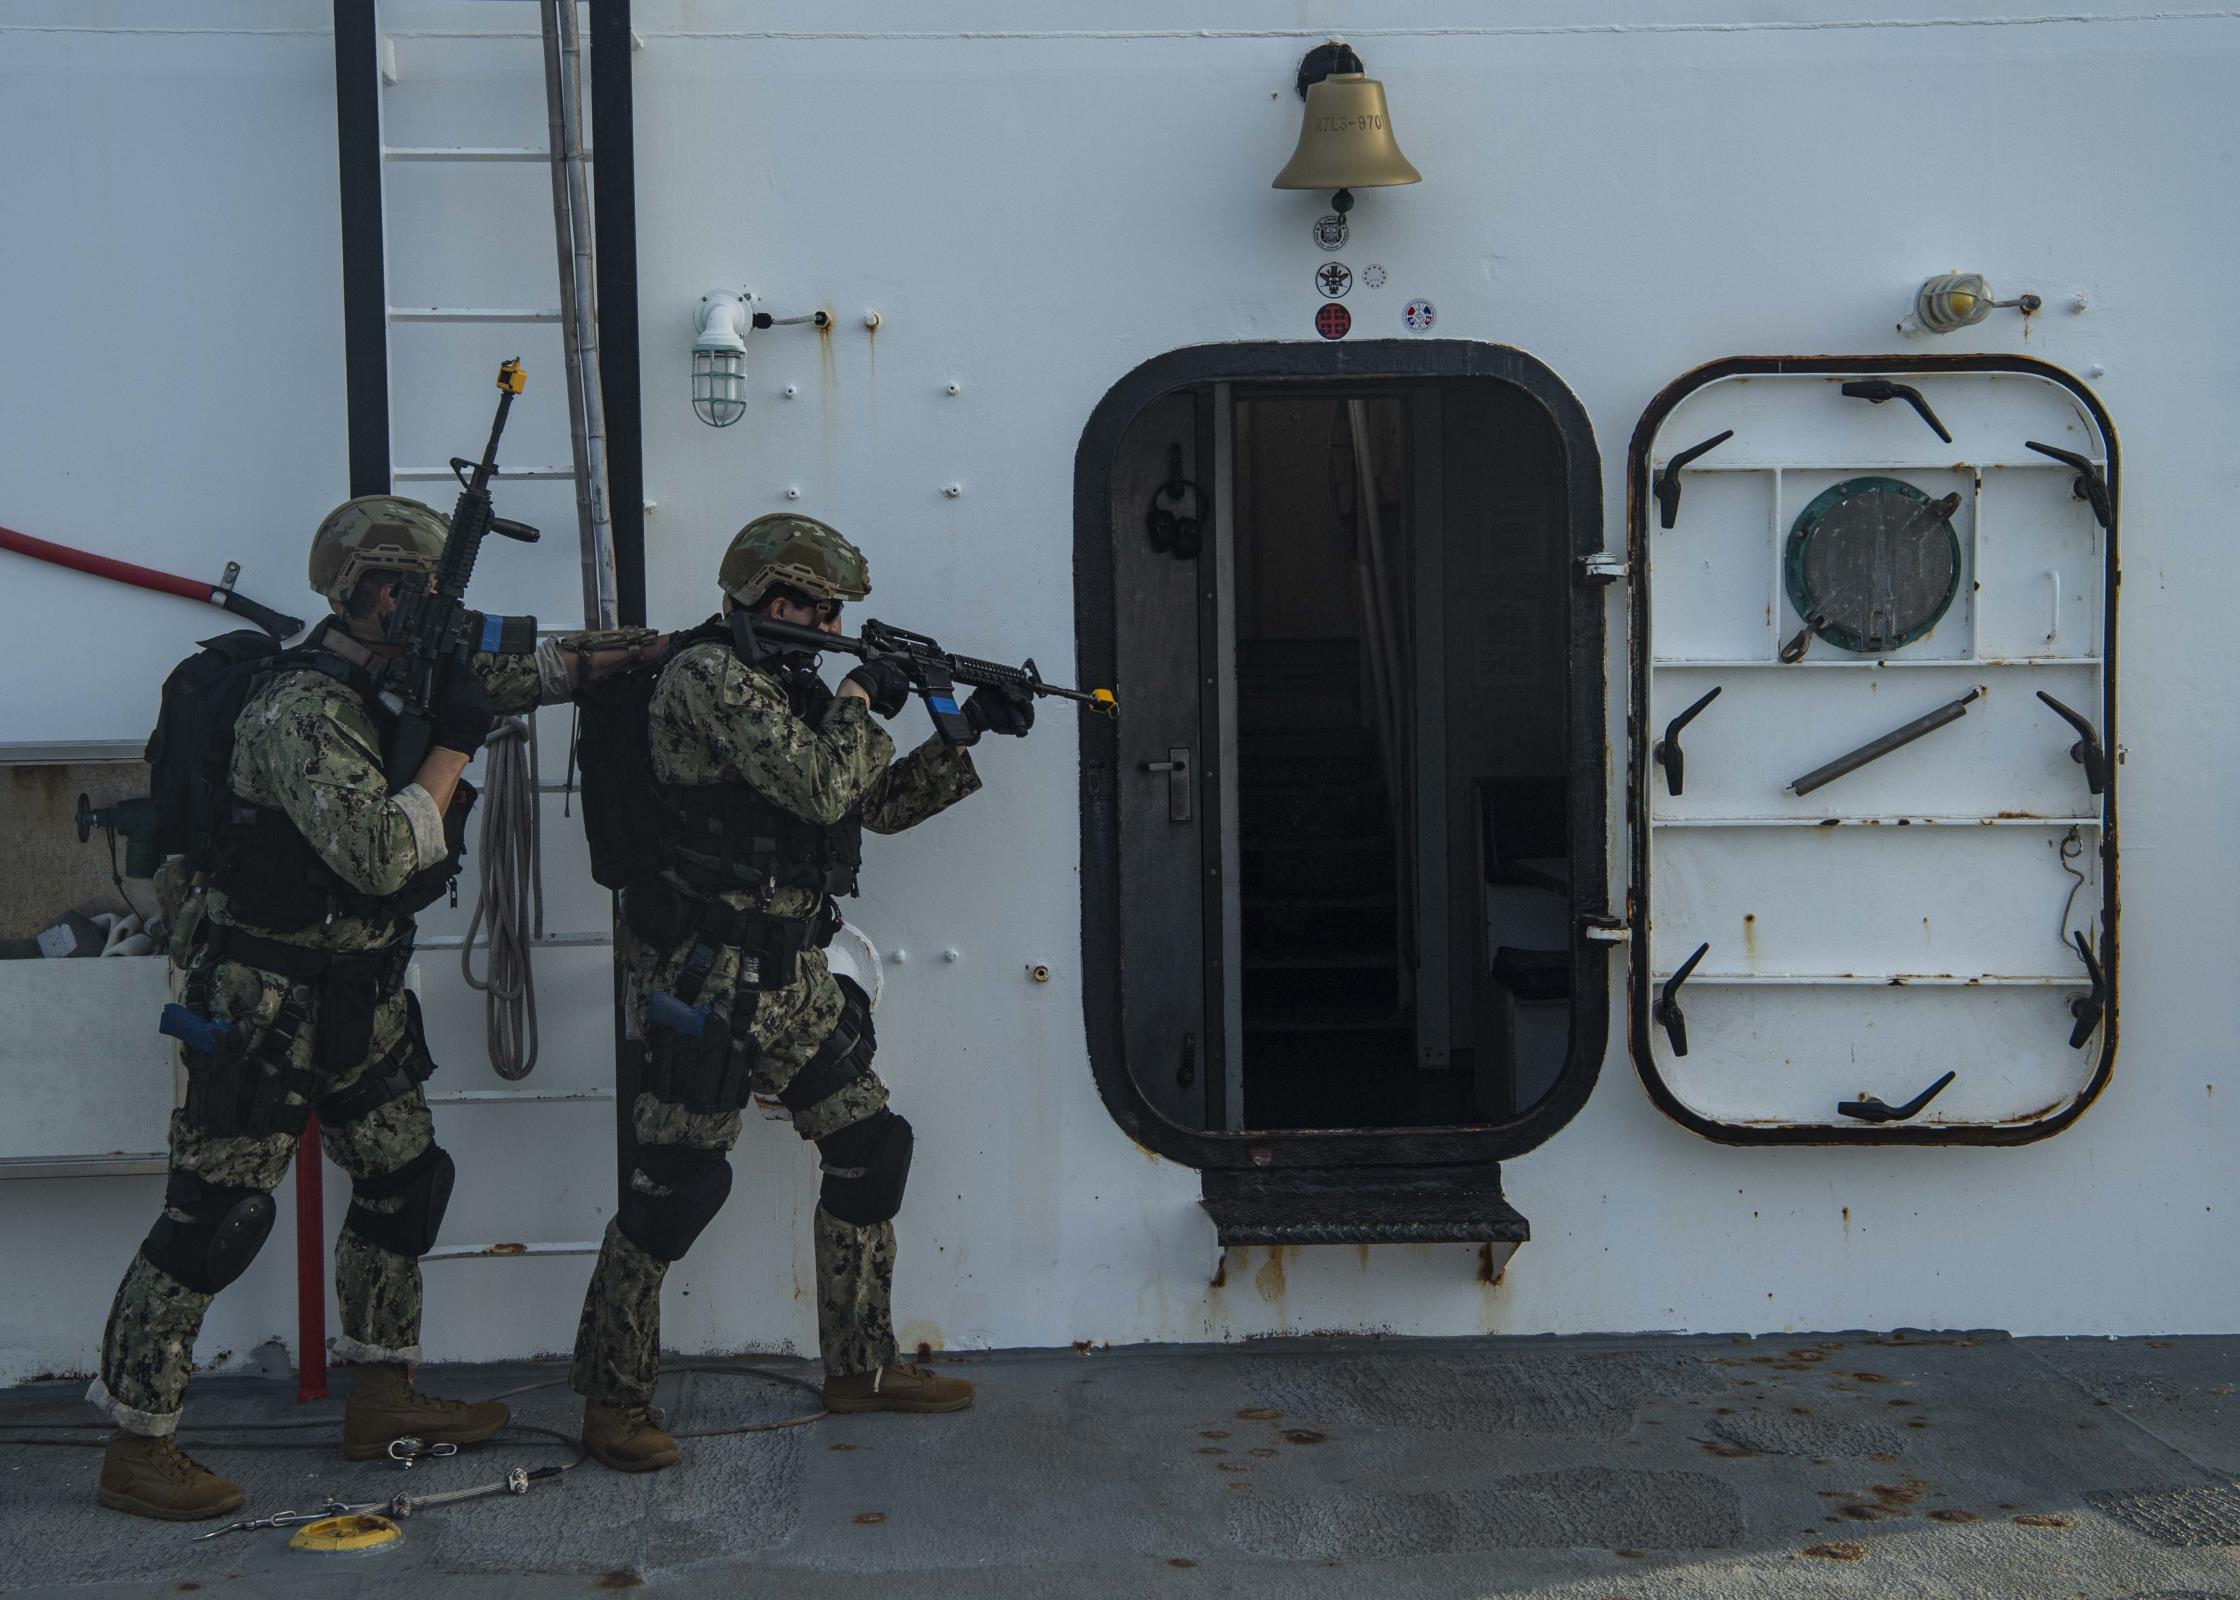 PACIFIC OCEAN (Nov. 9, 2021) Members of the Arleigh Burke-class guided-missile destroyer USS Gridley (DDG 101) visit, board, search and seizure (VBSS) team conduct a tactical sweep of a compartment aboard a foreign vessel during a counter piracy exercise. (U.S. Navy photo by Mass Communication Specialist 2nd Class Colby A. Mothershead/)